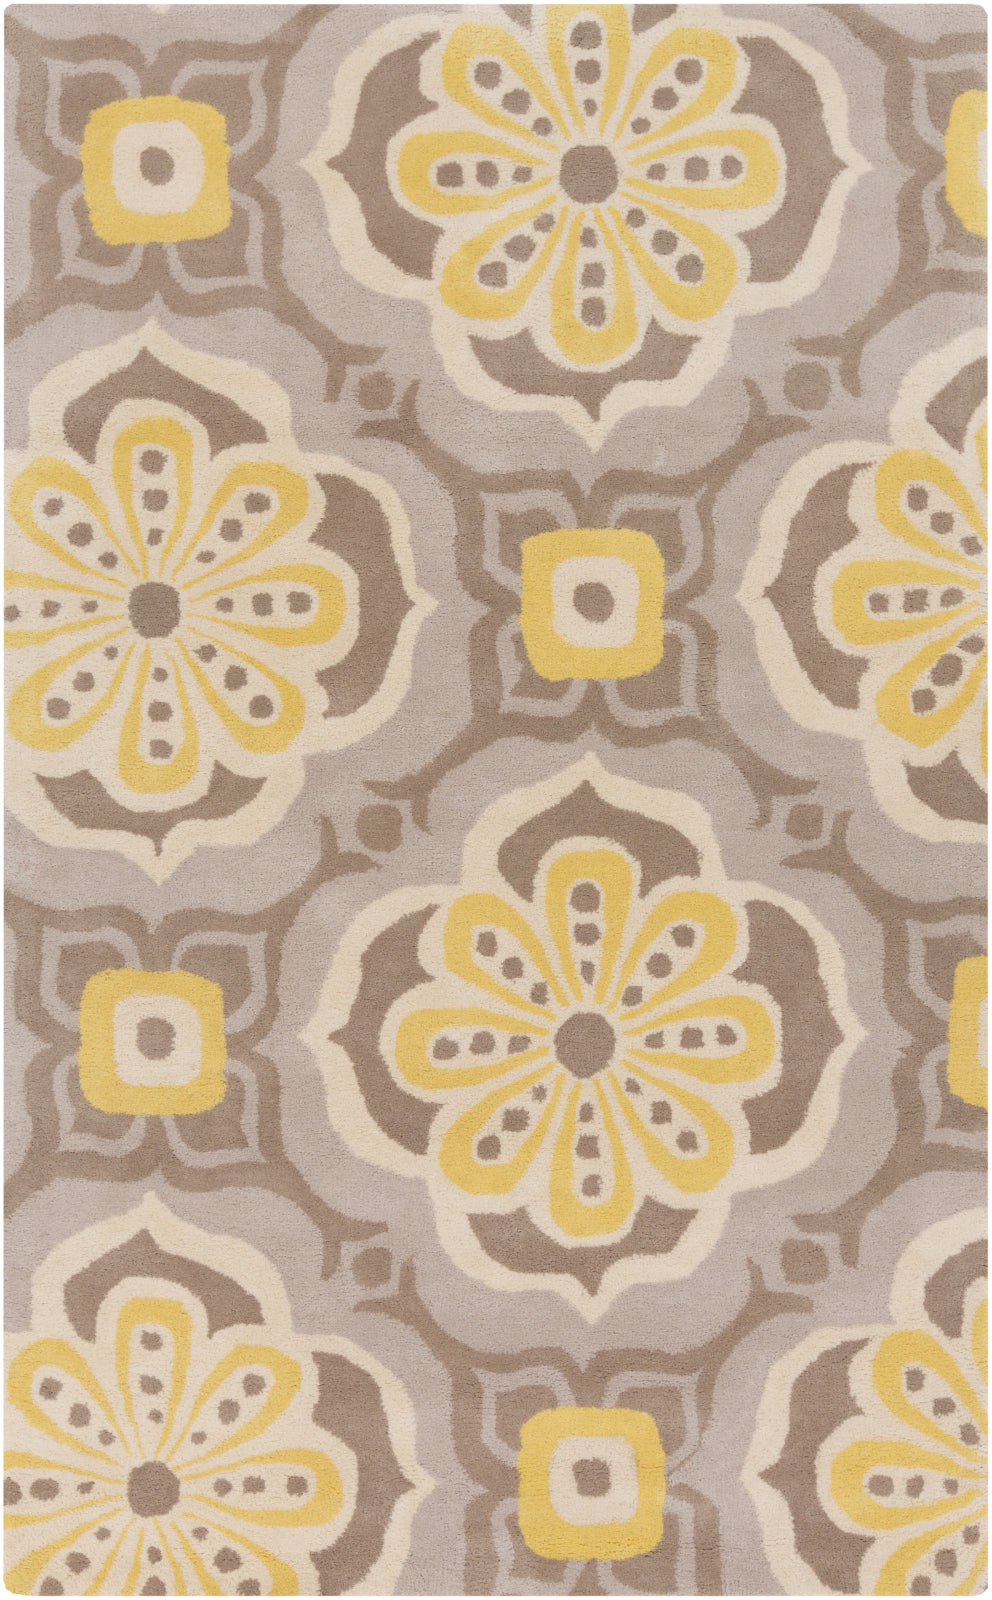 Surya Alhambra ALH-5010 Area Rug by Kate Spain main image